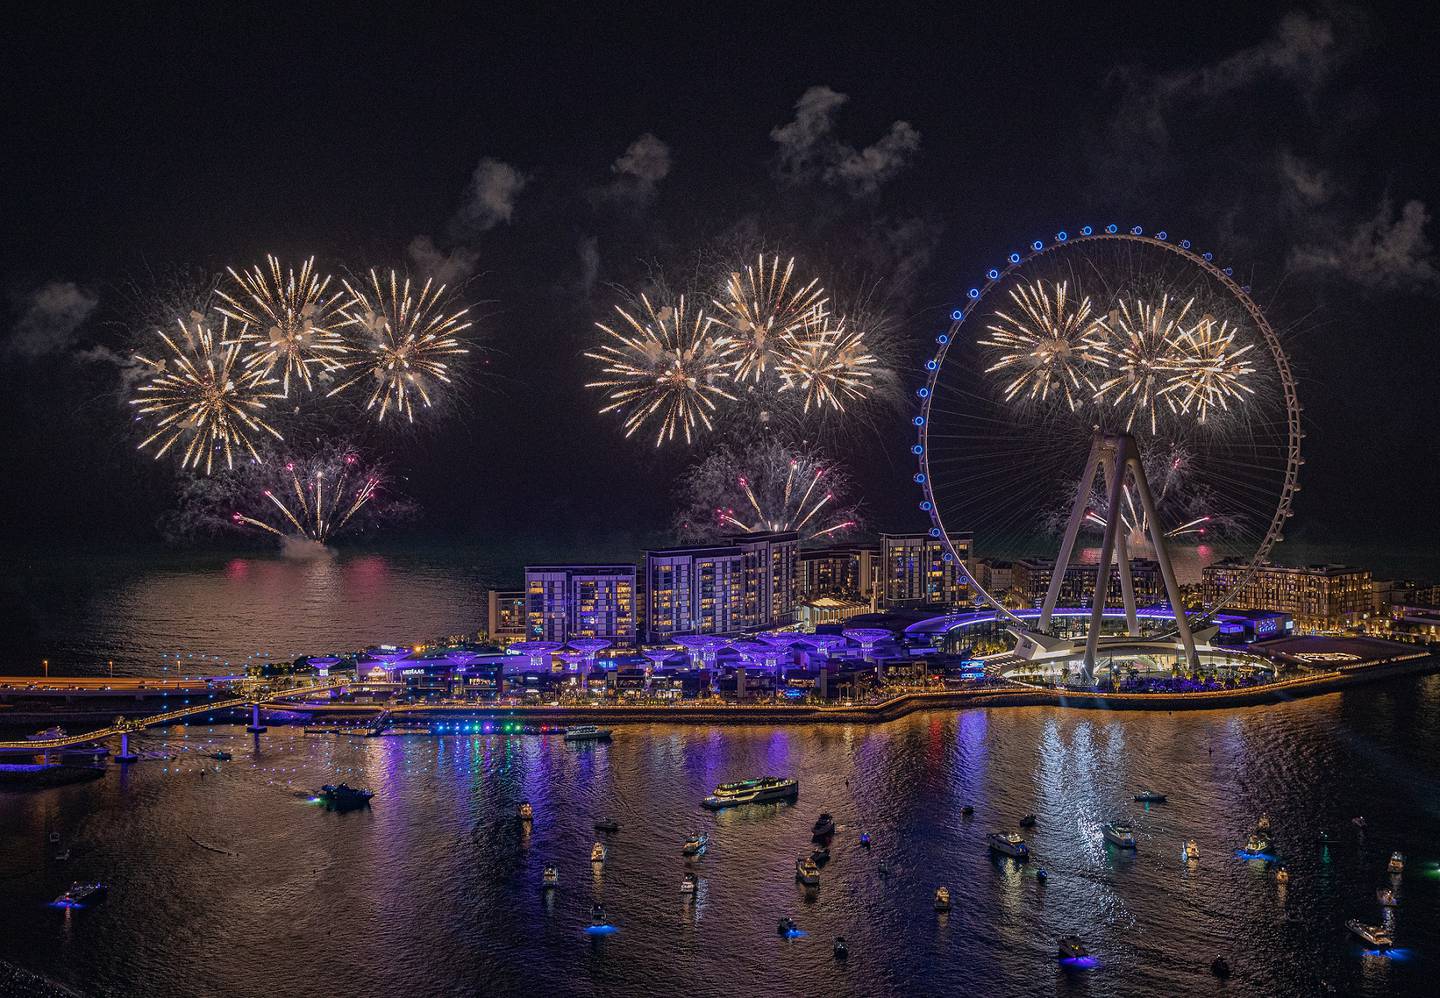 Bluewaters Island will be having fireworks for NYE 2021. Photo: Bluewaters Island